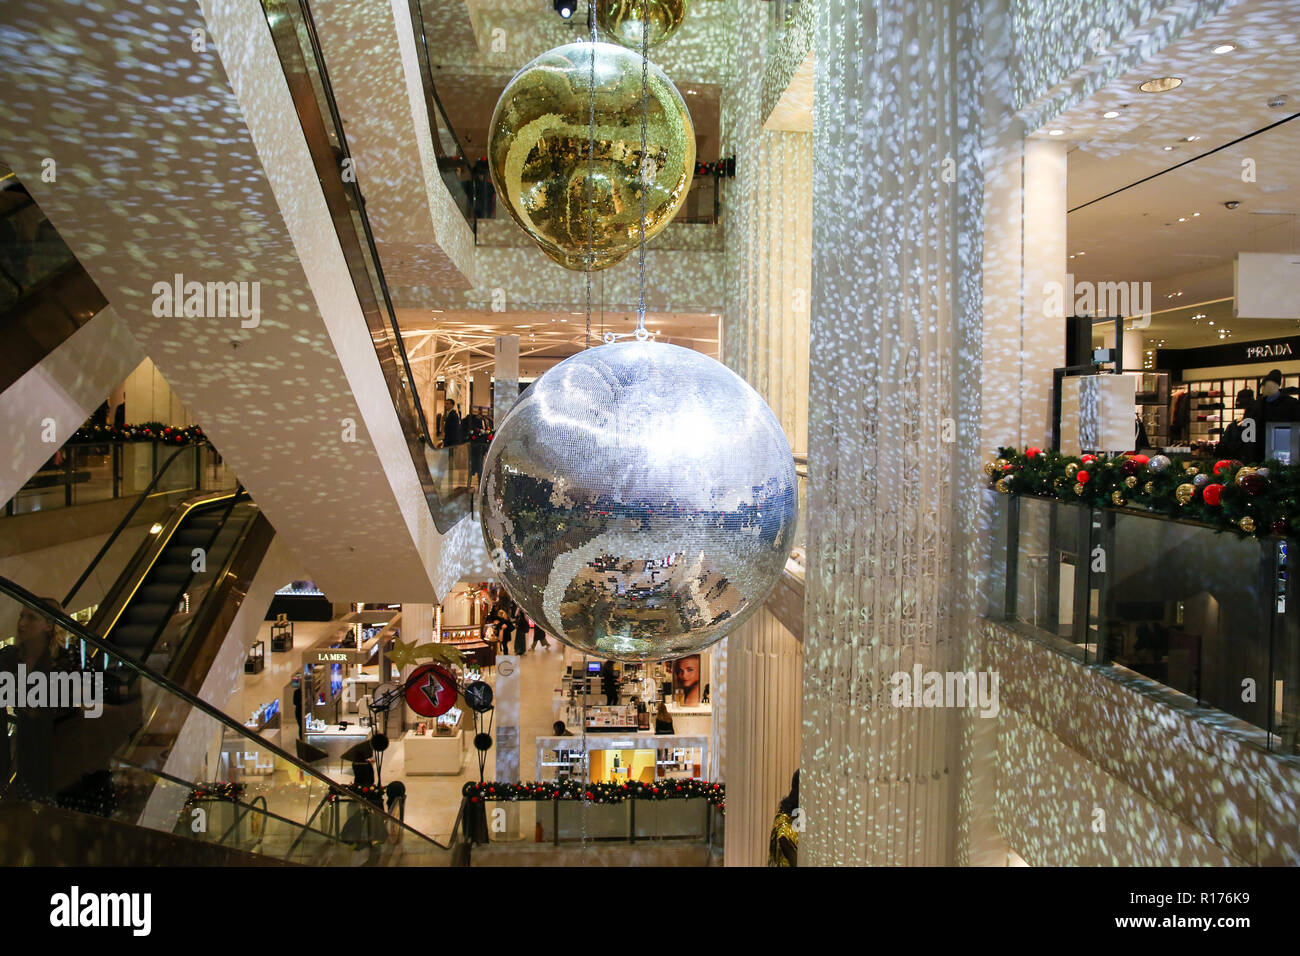 Interior view of Selfridges. Selfridges on Oxford Street, London is decorated with large glitter balls and Christmas lights for the festive season. Stock Photo